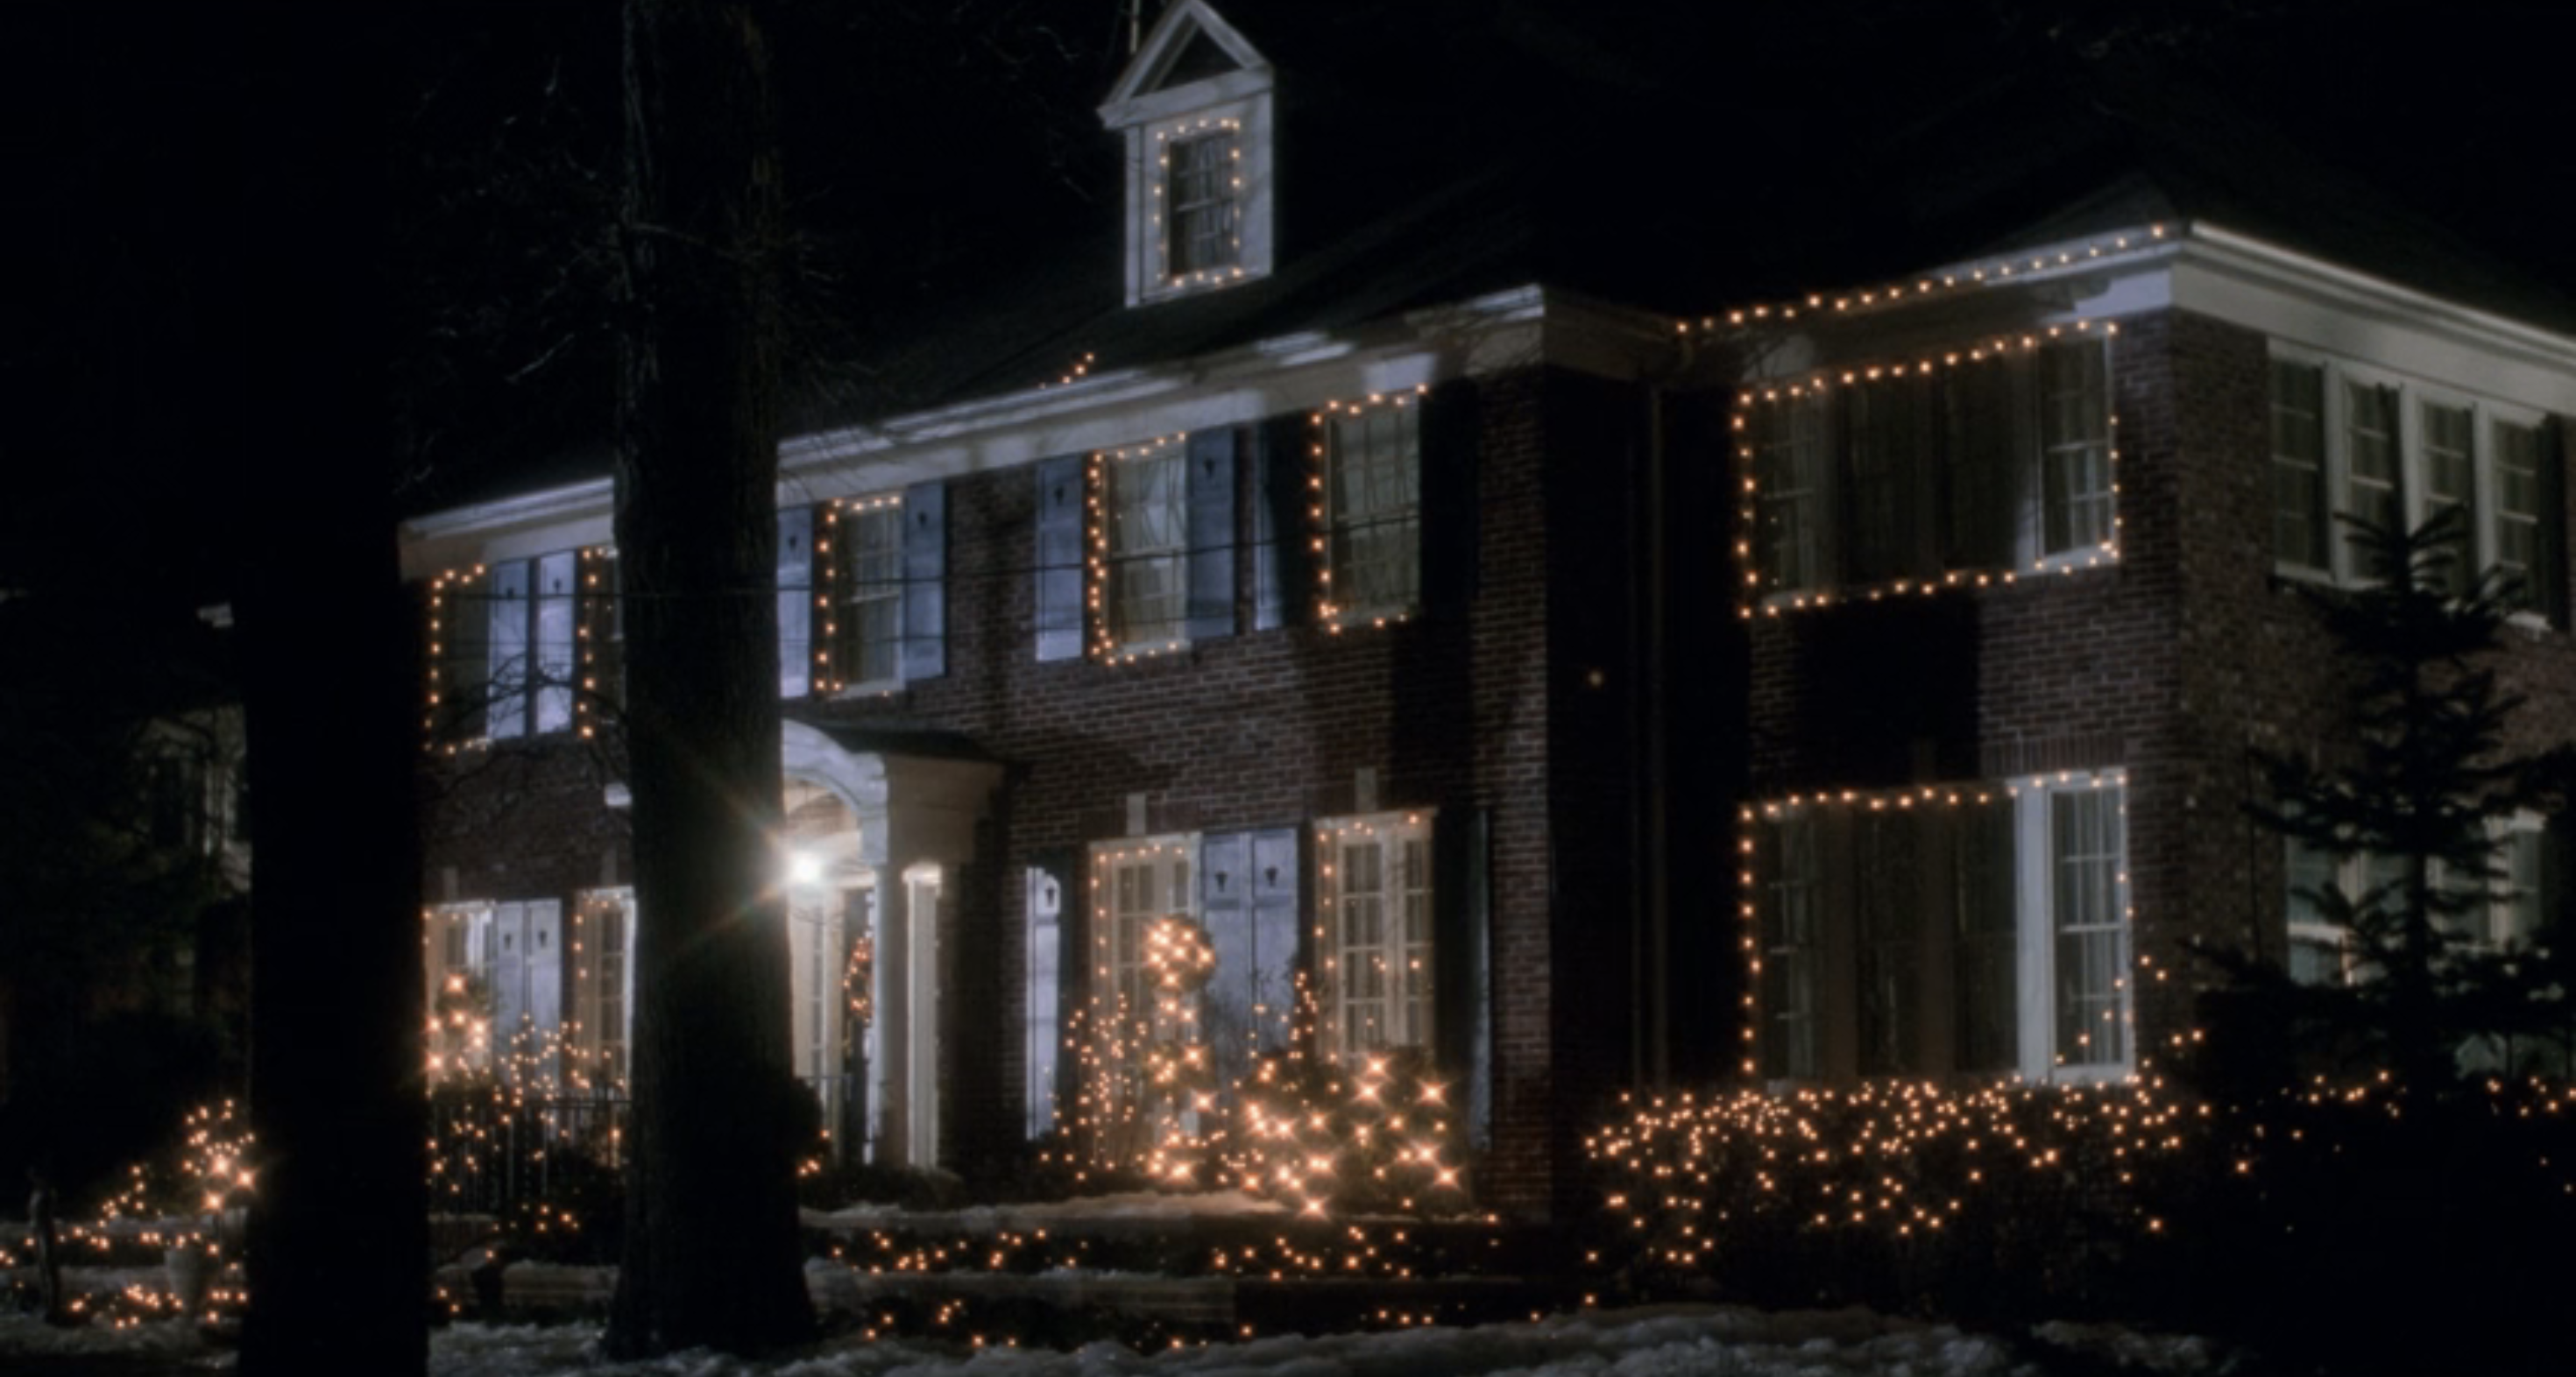 The exterior of the house with Christmas lights